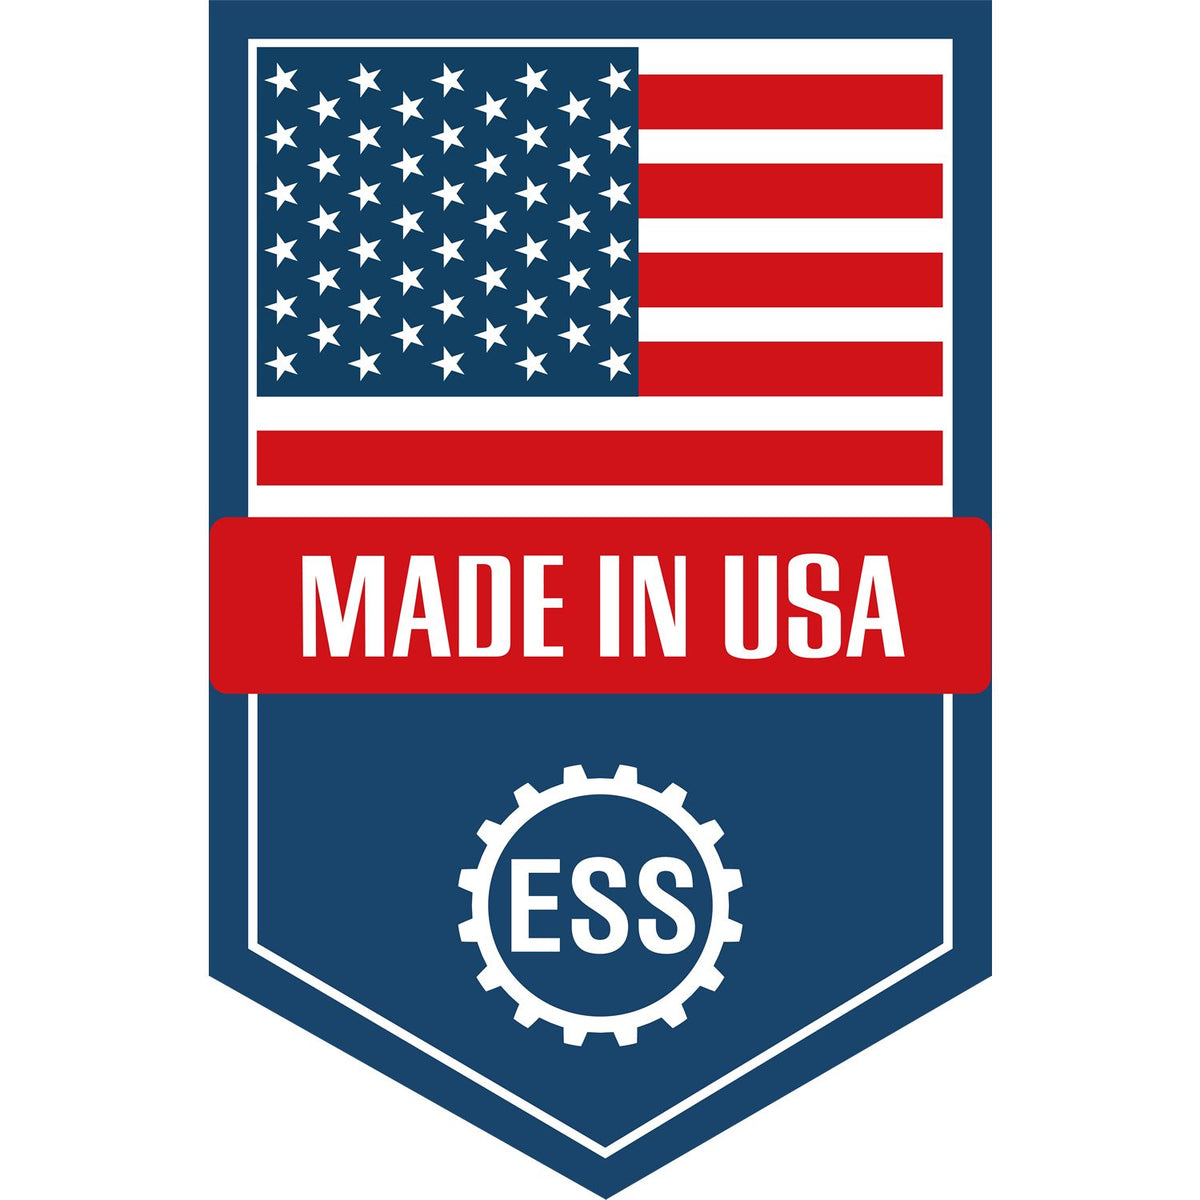 An icon or graphic with an american flag and text reading Made in USA for the Massachusetts Landscape Architectural Seal Stamp